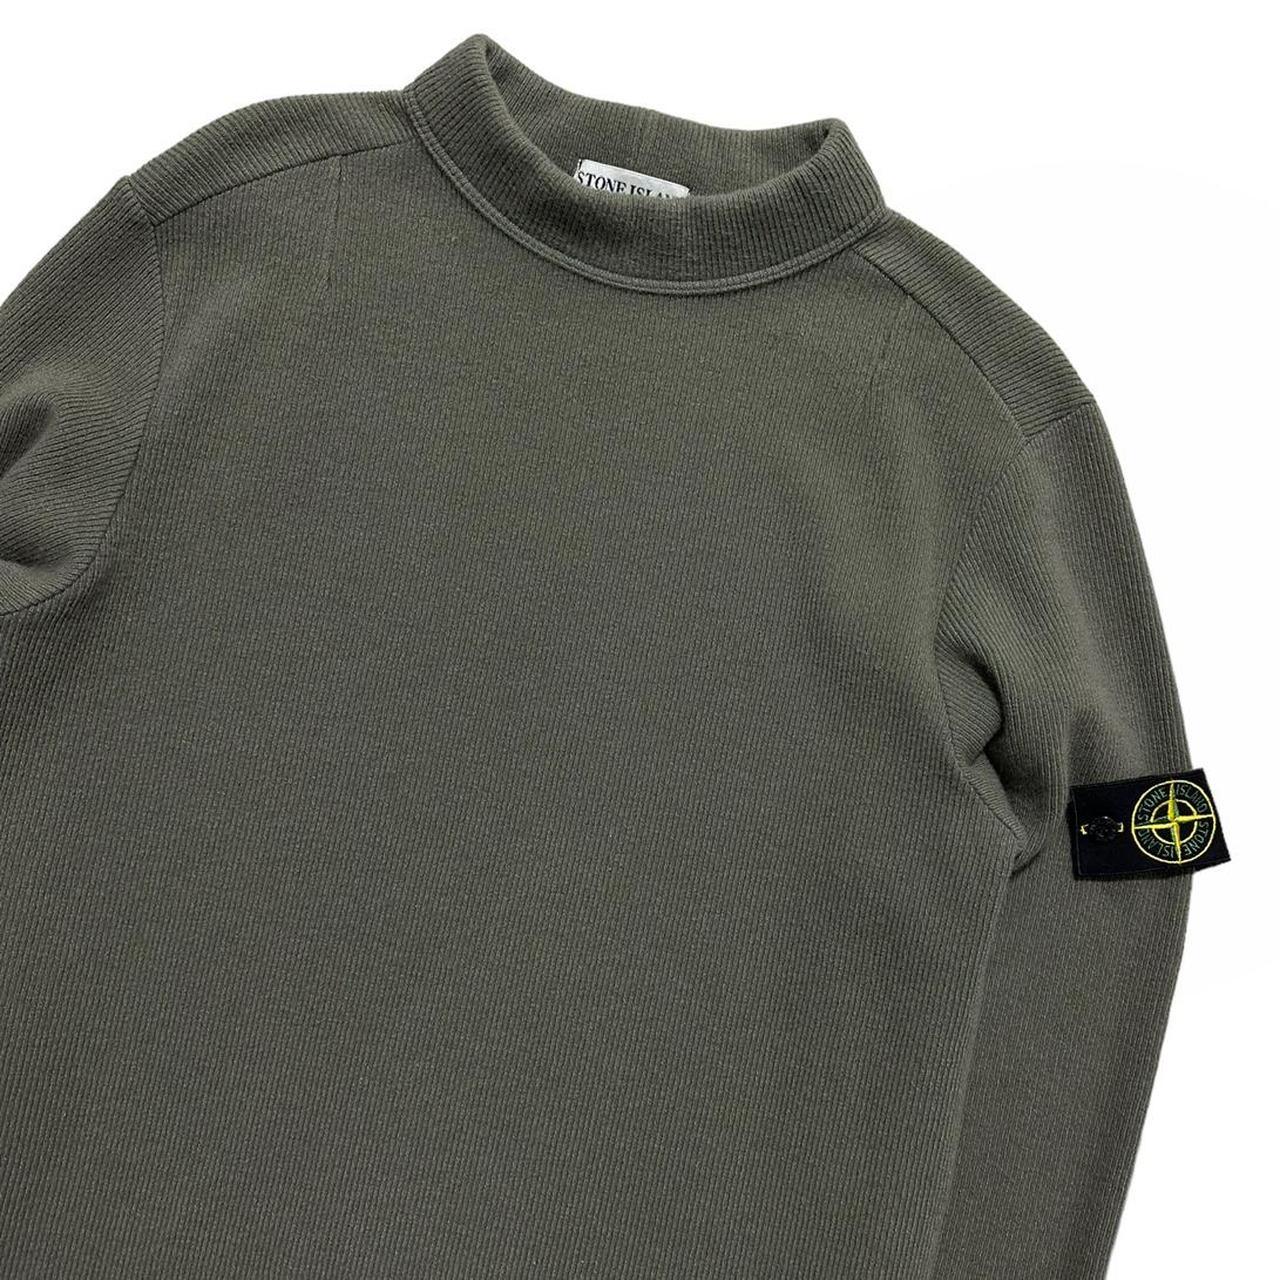 Stone Island A/W 2001 Ribbed Pullover Jumper - Known Source